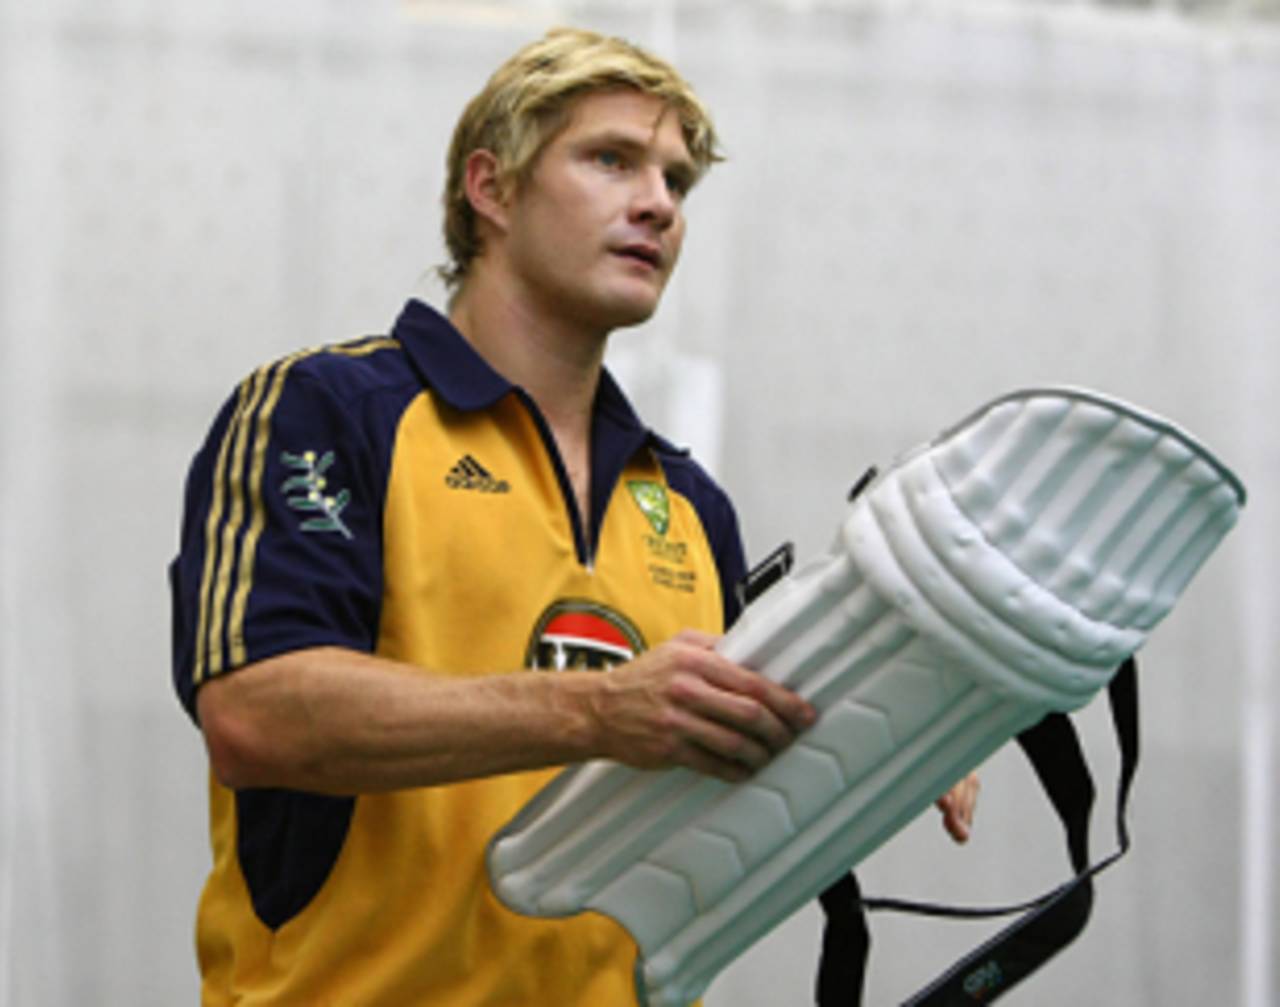 Shane Watson pads up for a hit at the nets, Cardiff, July 6, 2009